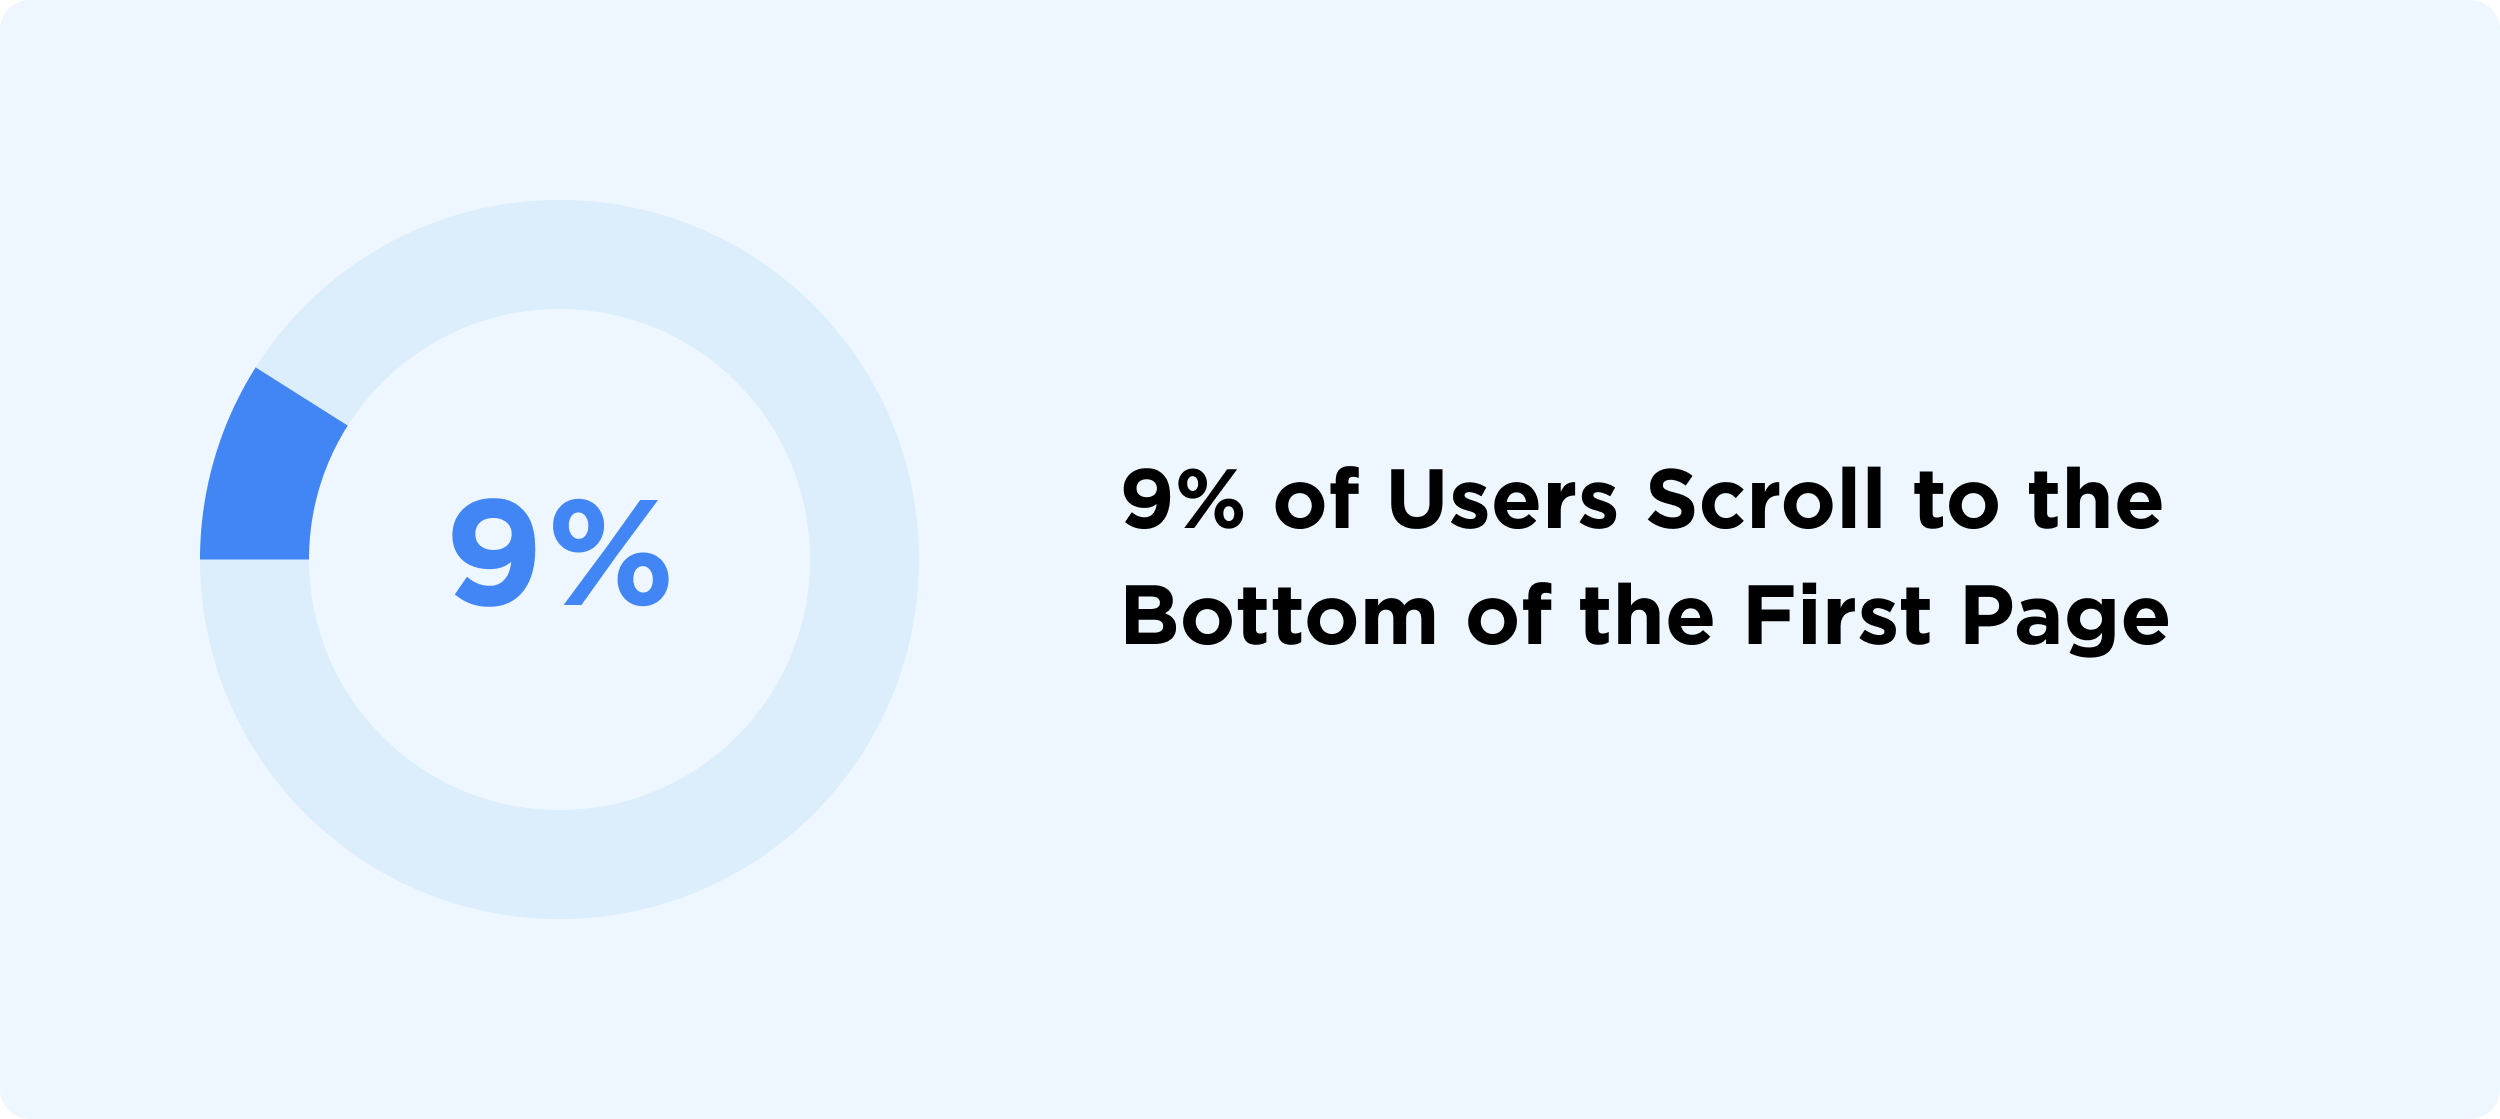 9% of Users Scroll to the Bottom of the First Page